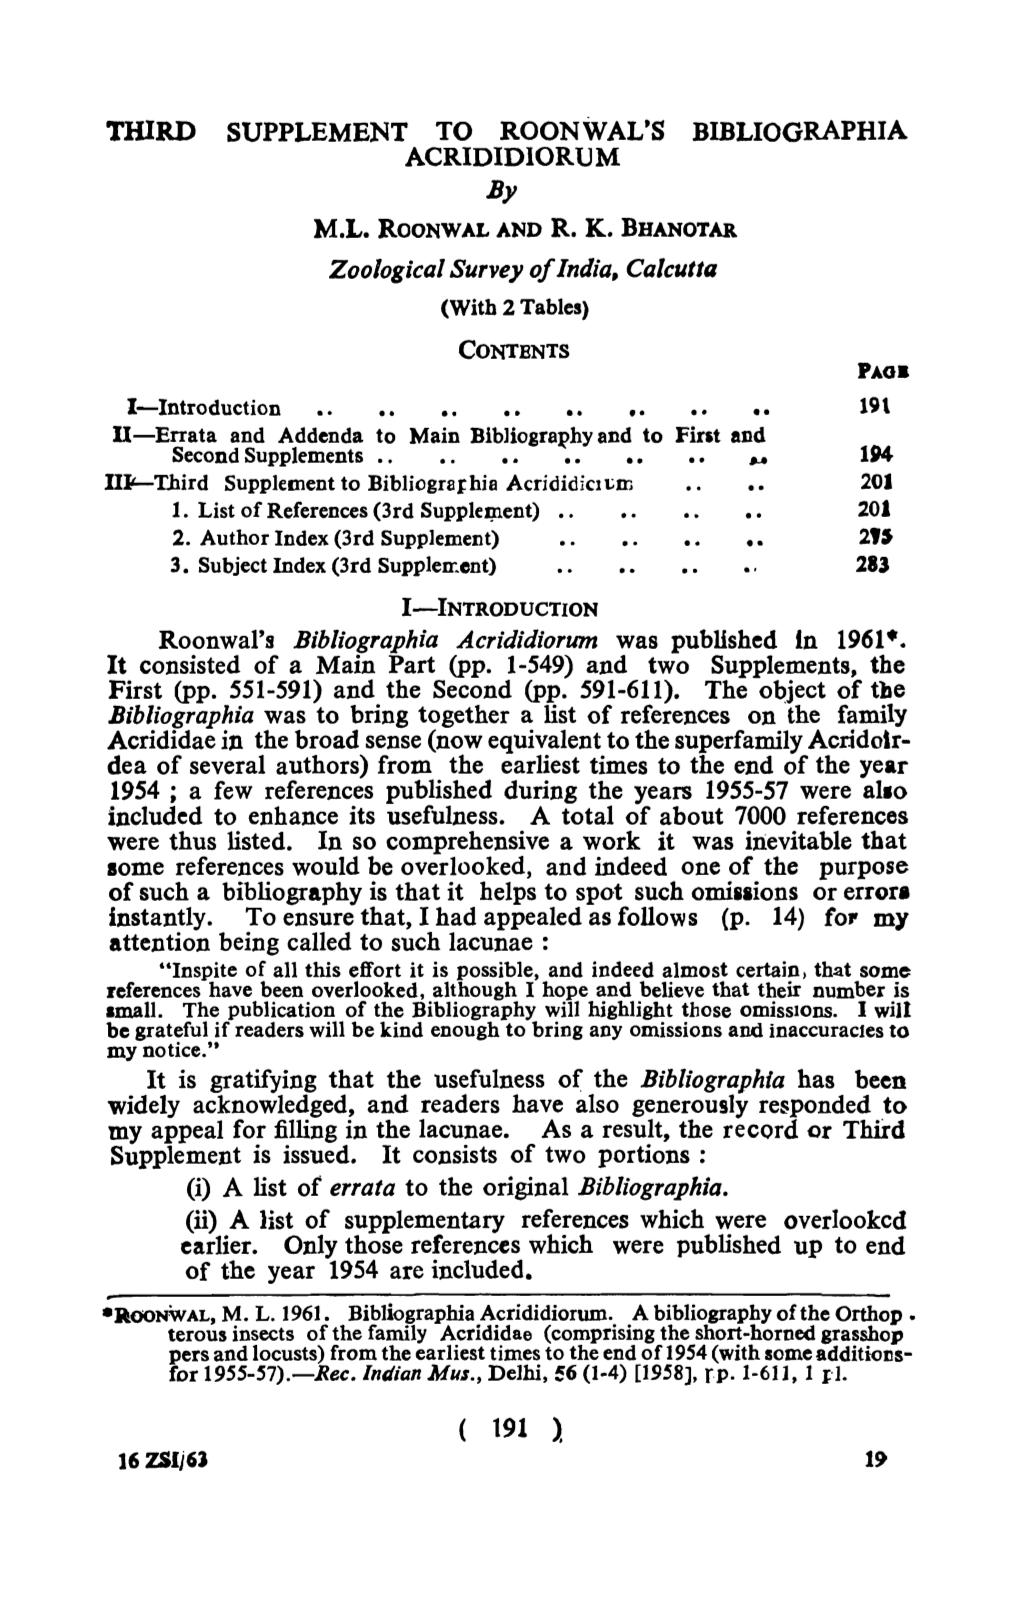 THIRD SUPPLEMENT to ROONWAL's BIBLIOGRAPHIA ACRIDIDIORUM by It Consisted of a Main Part